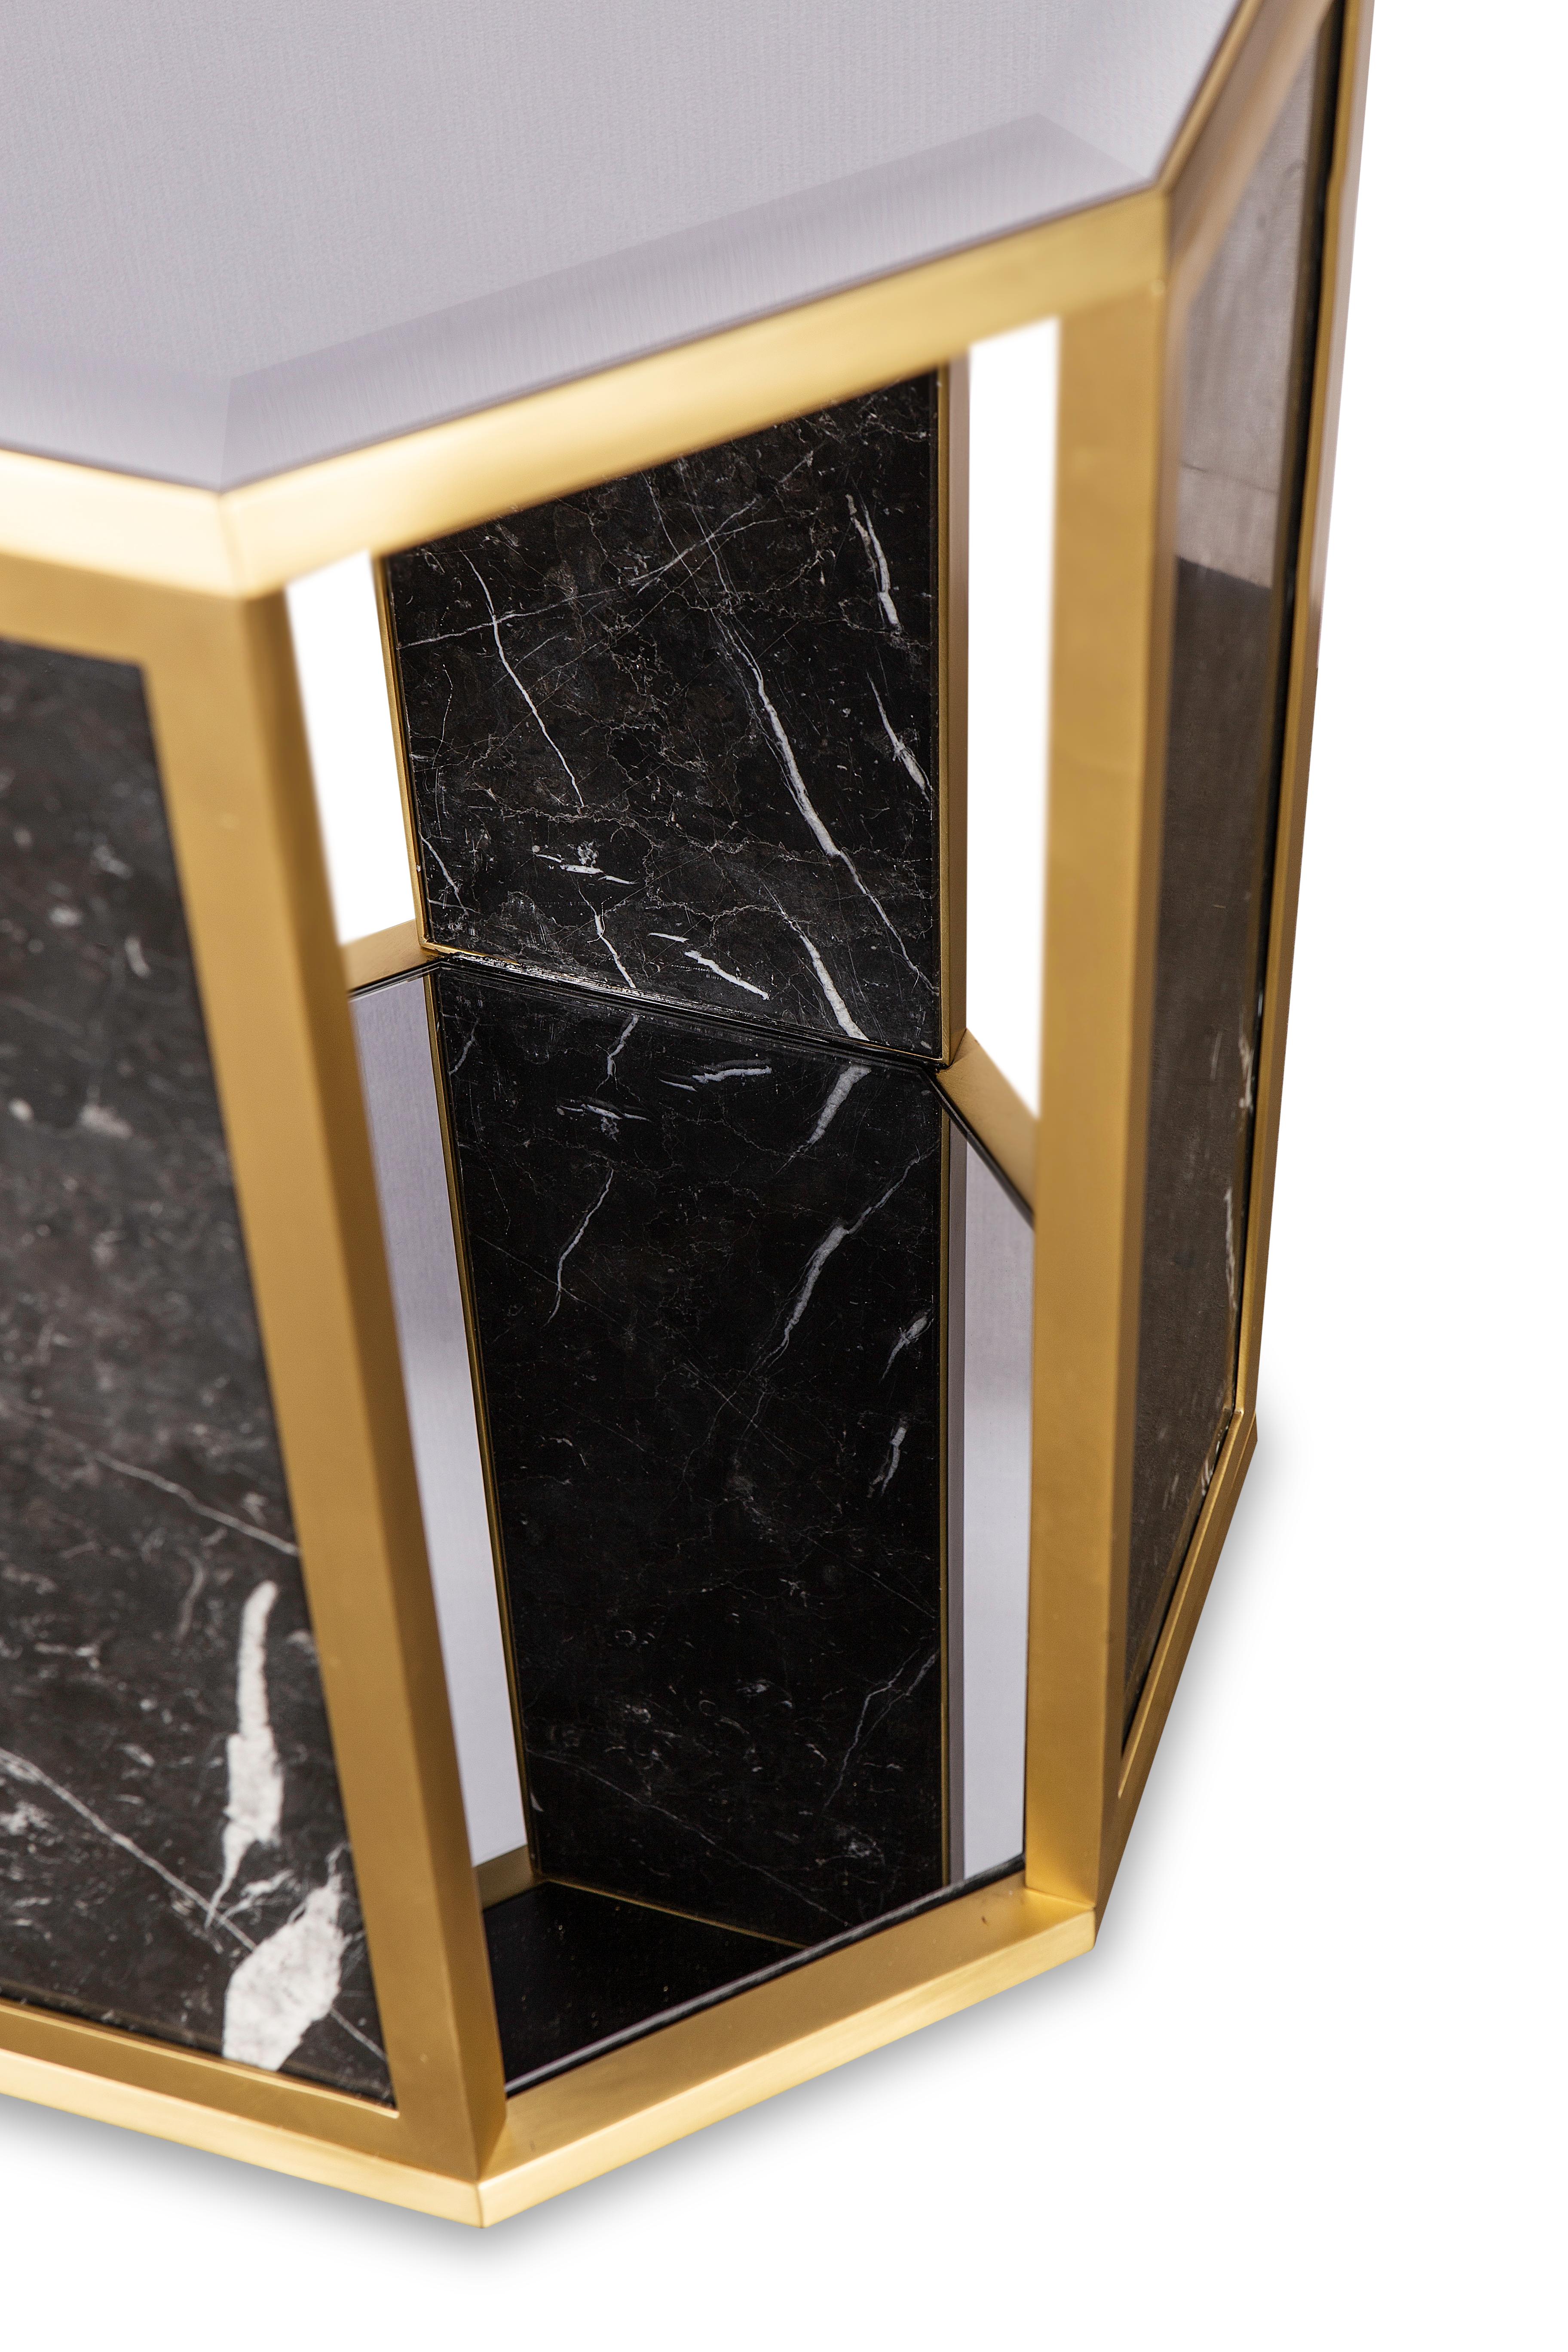 Octogon Side Table by Memoir Essence
Dimensions: D 46 x W 46 x H 54,5 cm.
Materials: Brushed brass, Nero Marquina marble and gris mirror.

Also available in polished brass. Please contact us.

Octogon side table presents a geometrical shape, this